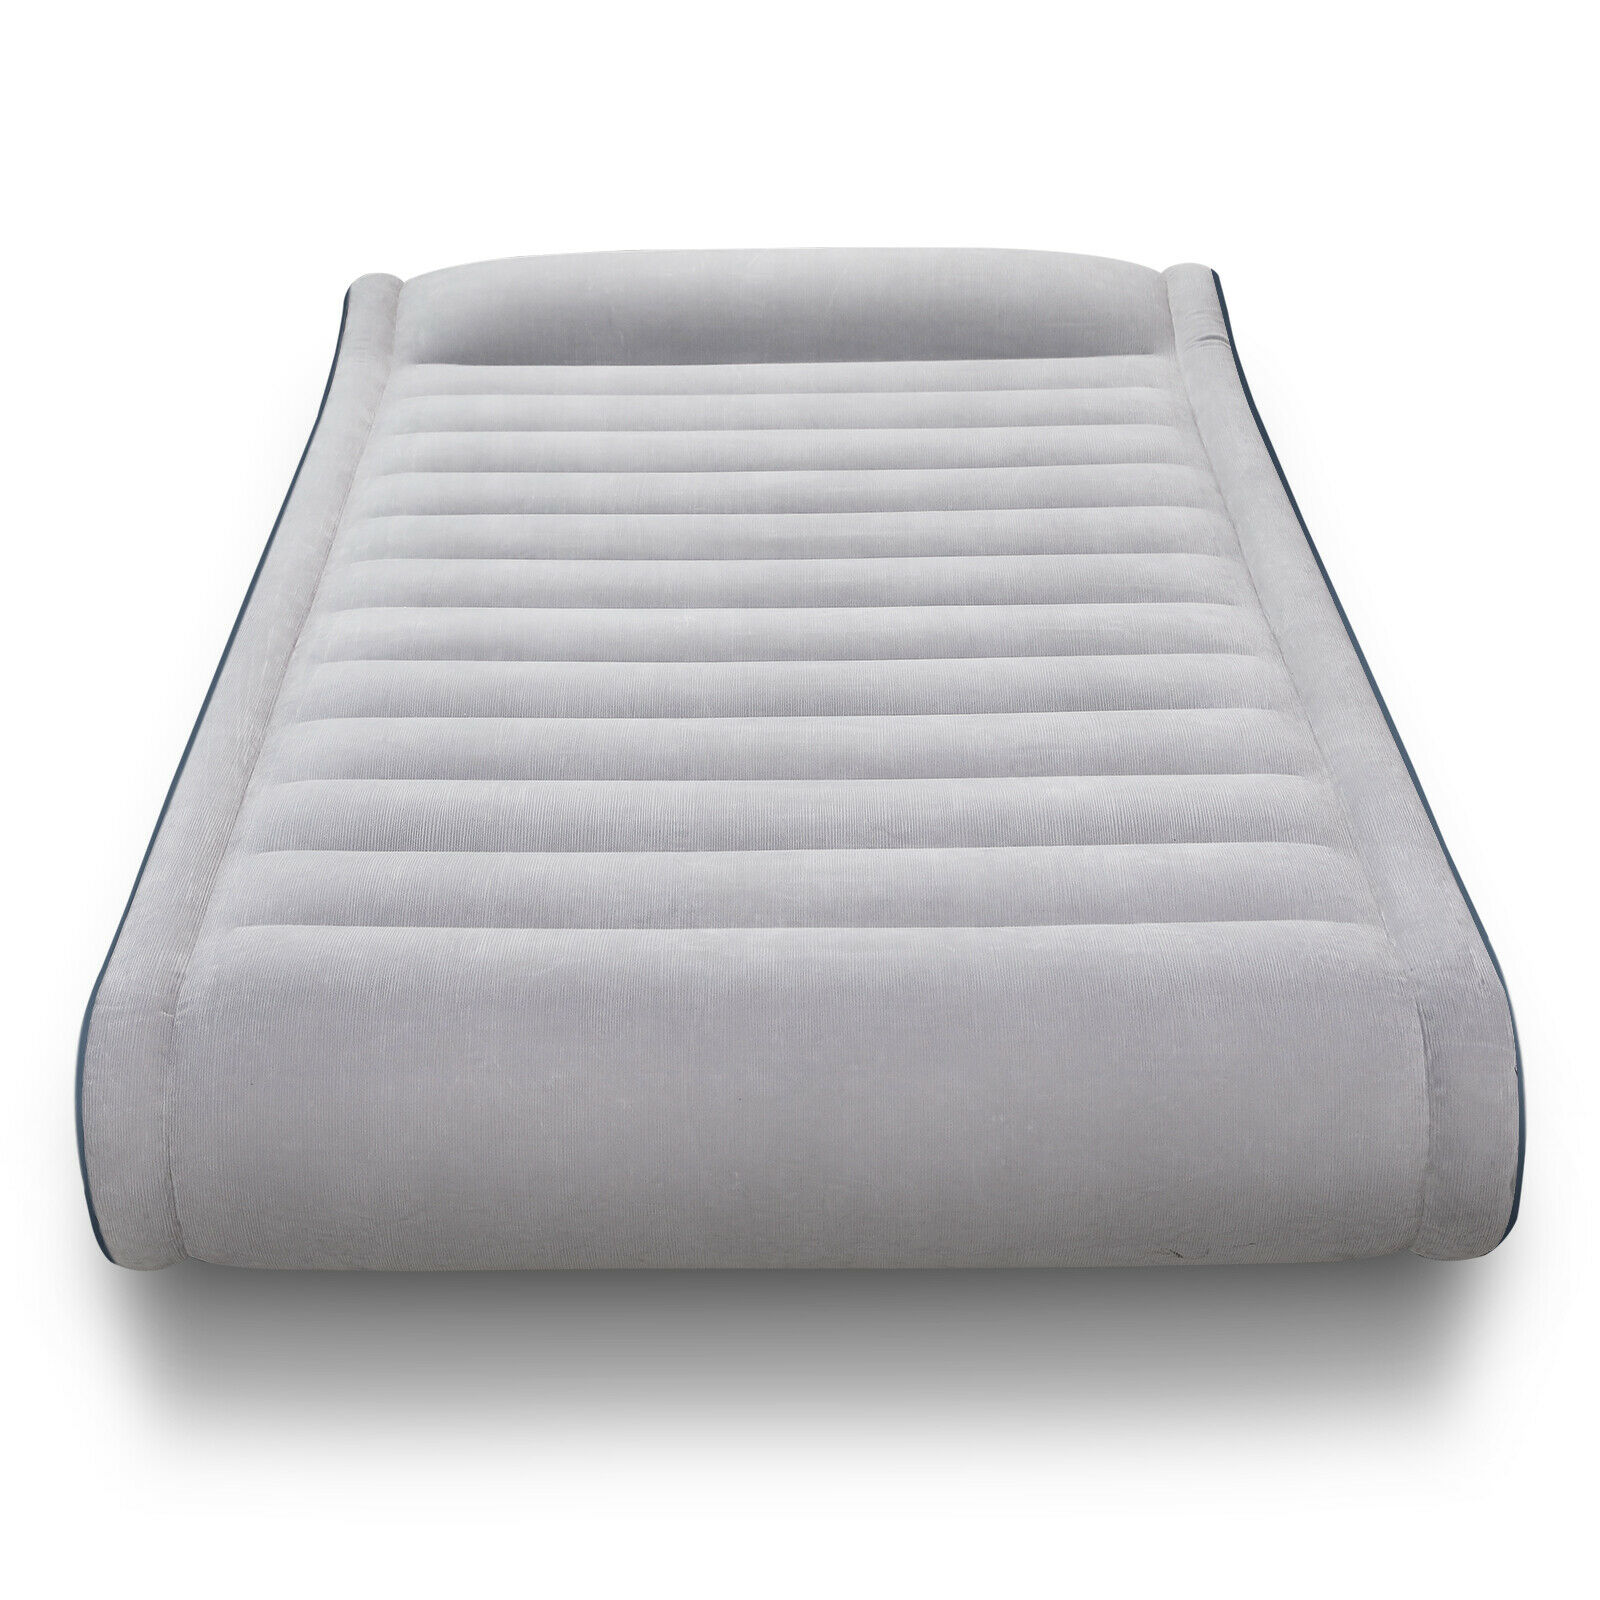 Sable Full Size Double-High Inflatable Air Mattress Bed with Built-In Pump HF033